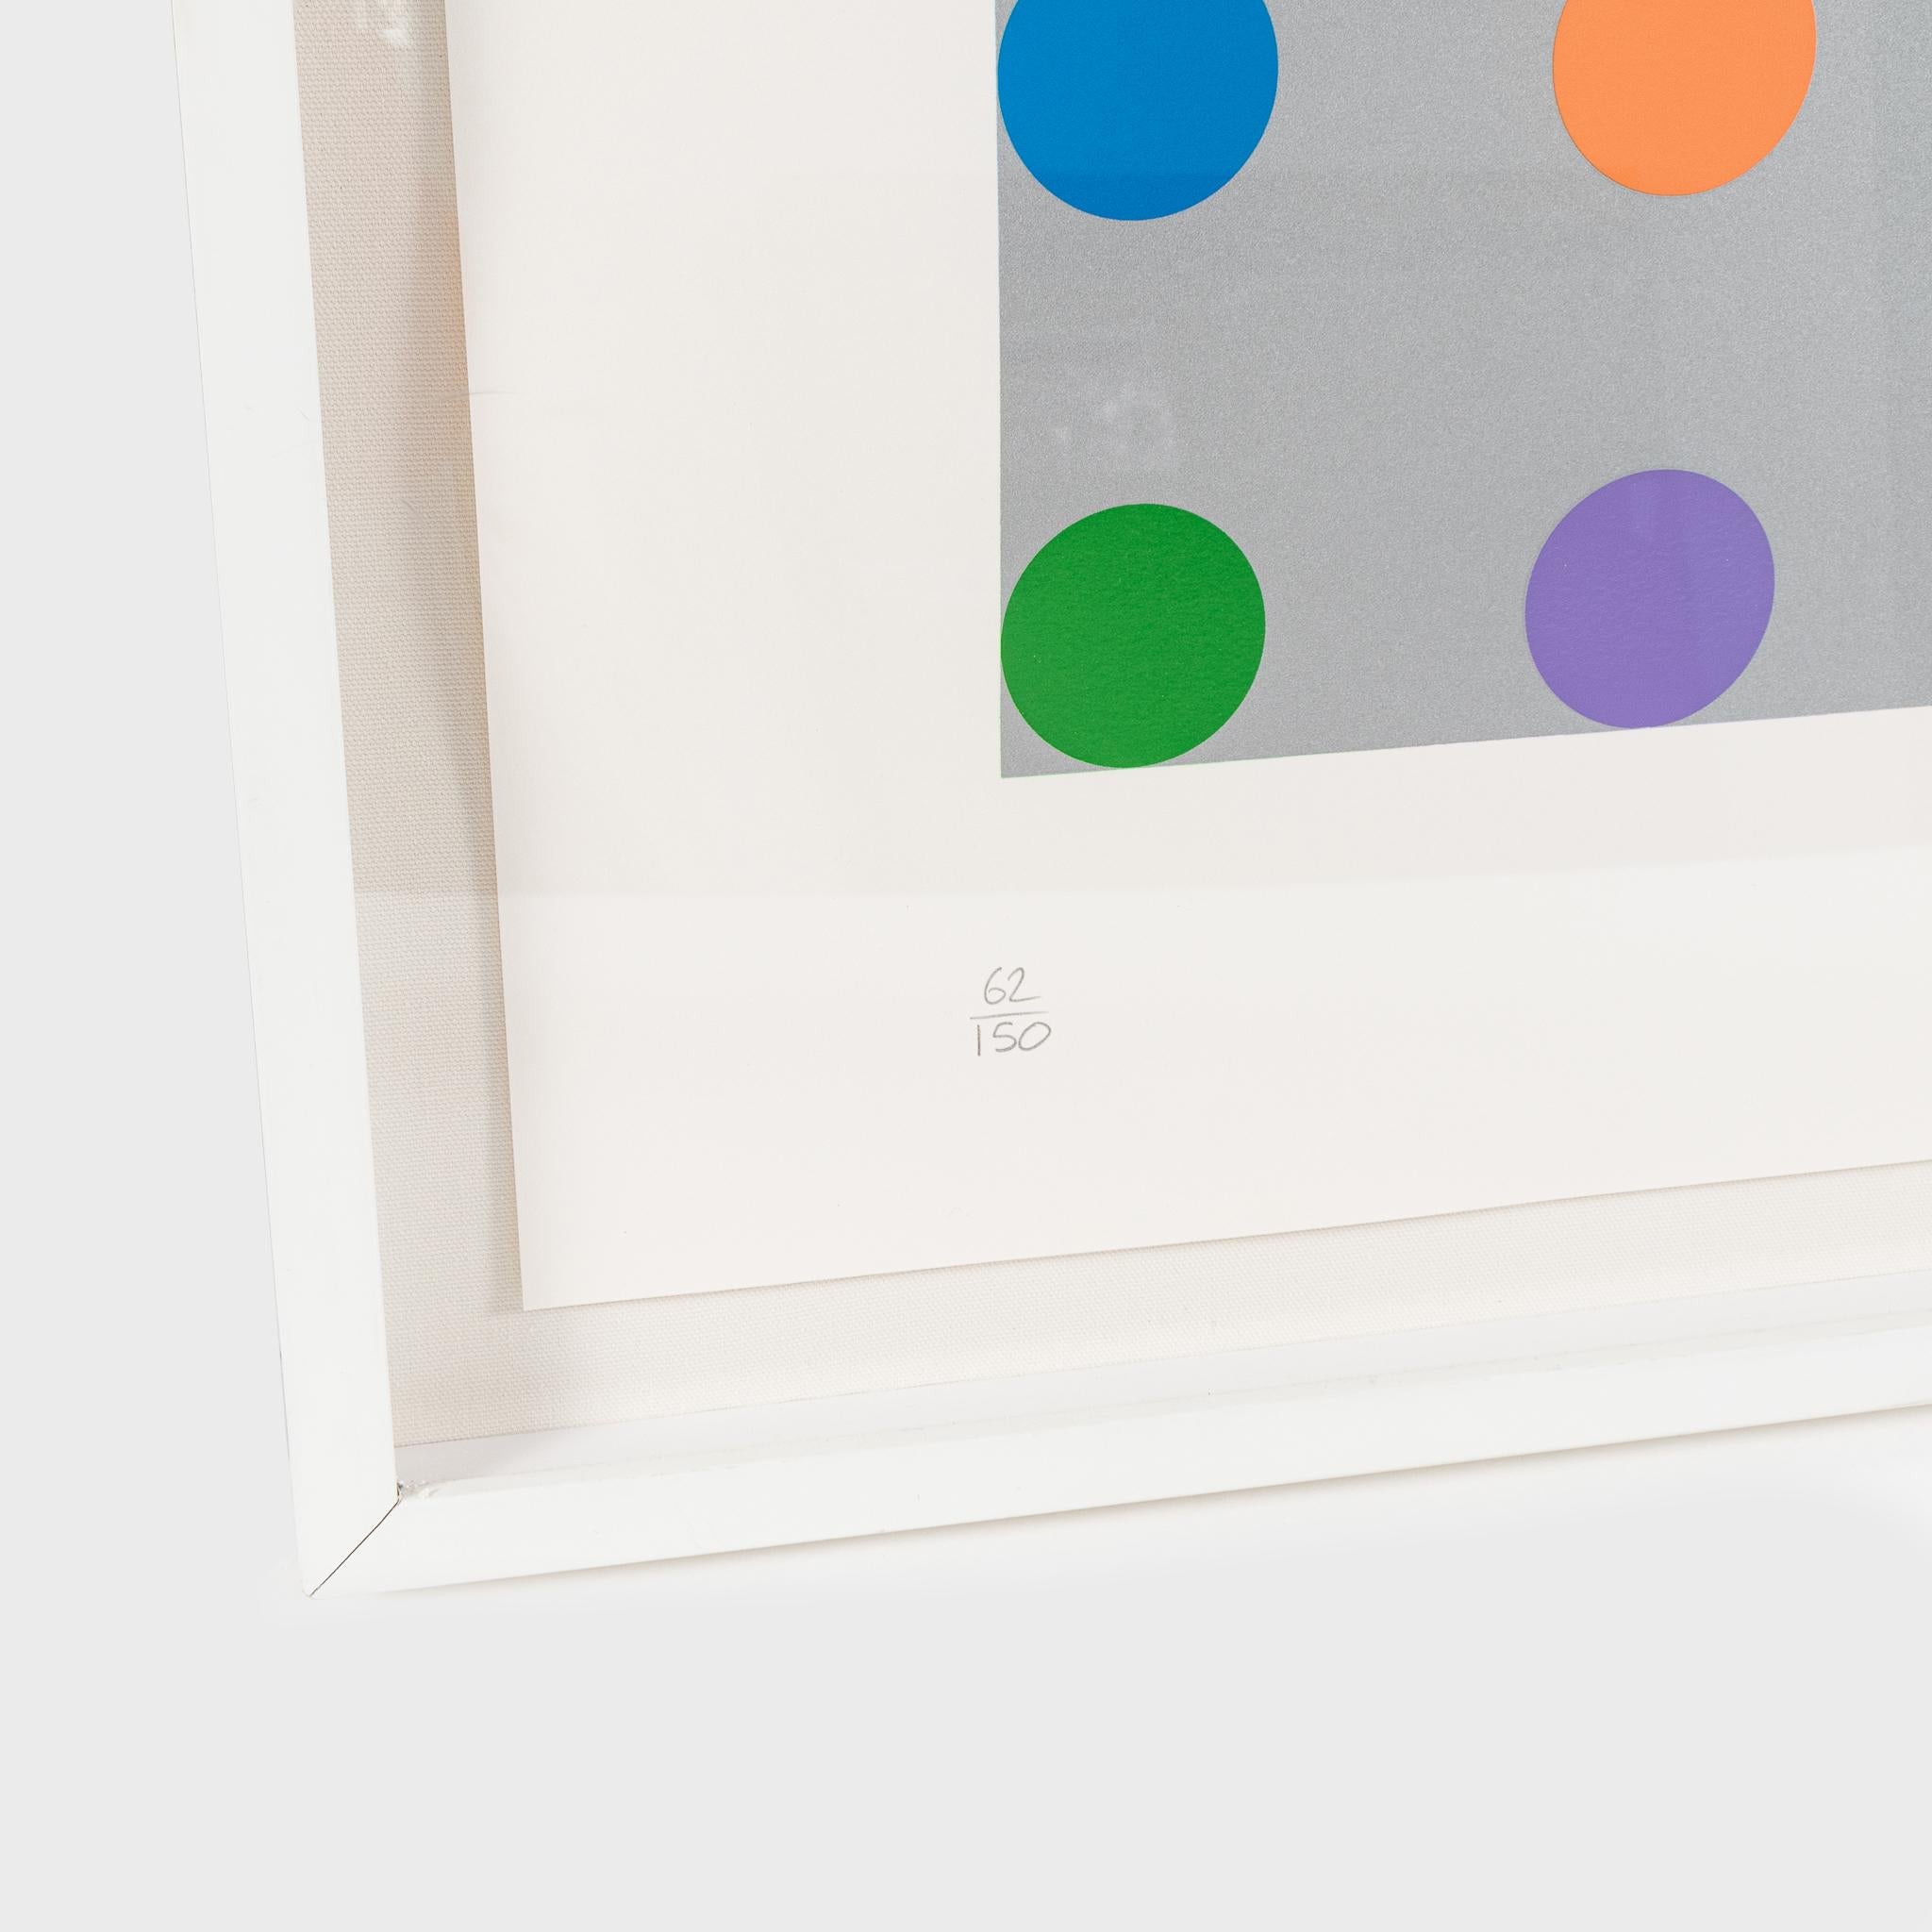 Histidyl - Contemporary Print by Damien Hirst